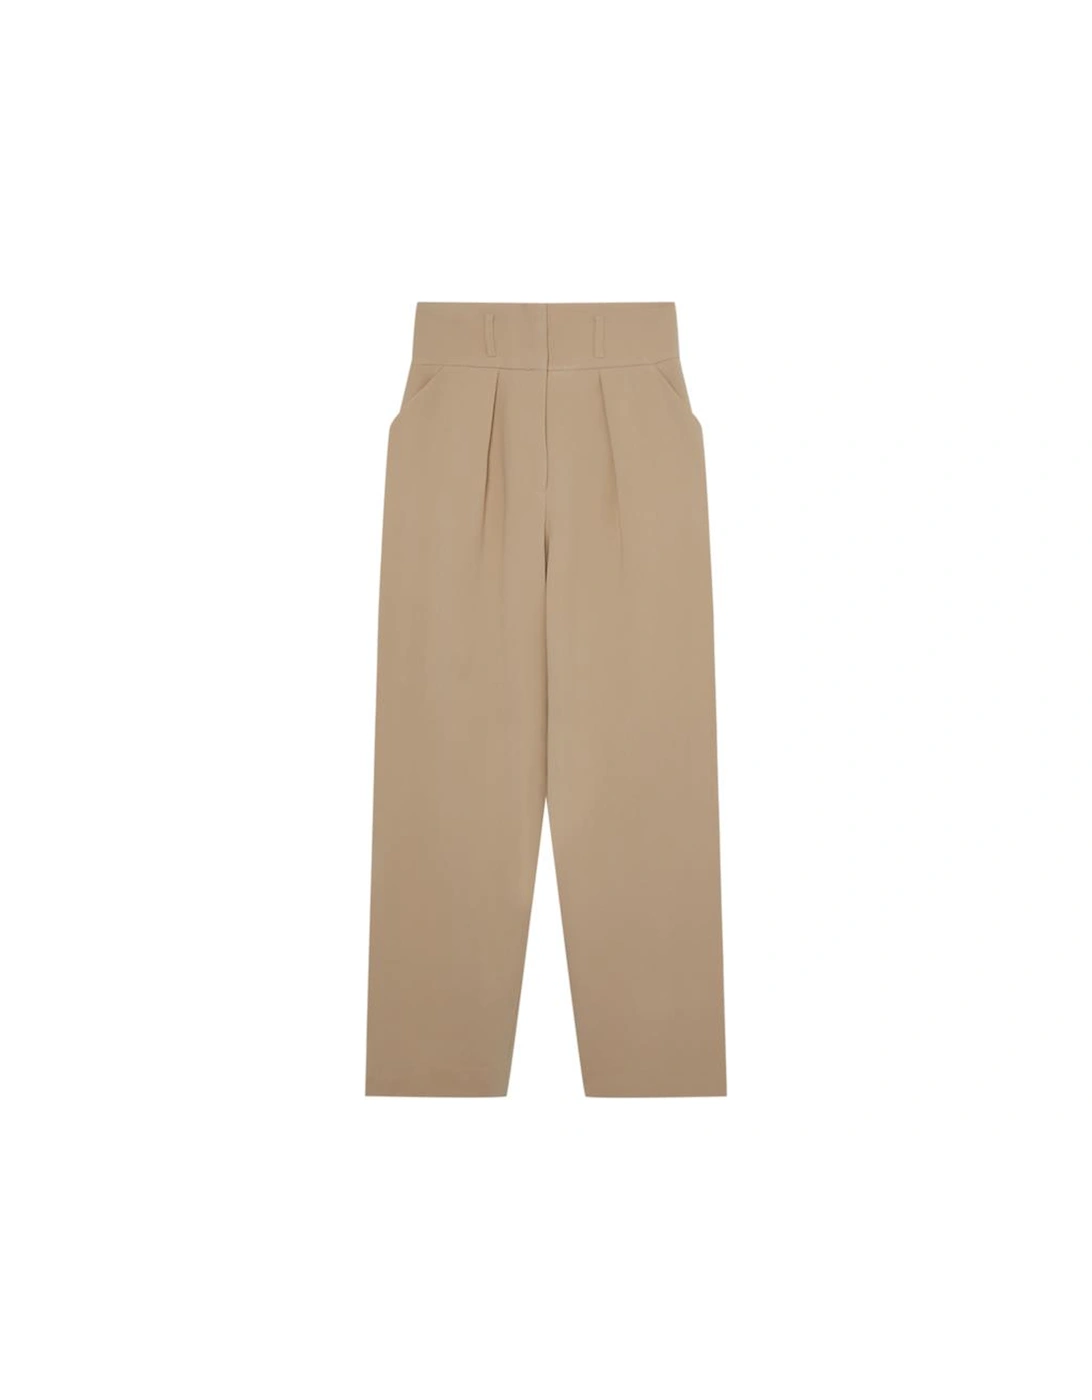 Tailored High Waisted Pleated Wide Leg Trousers